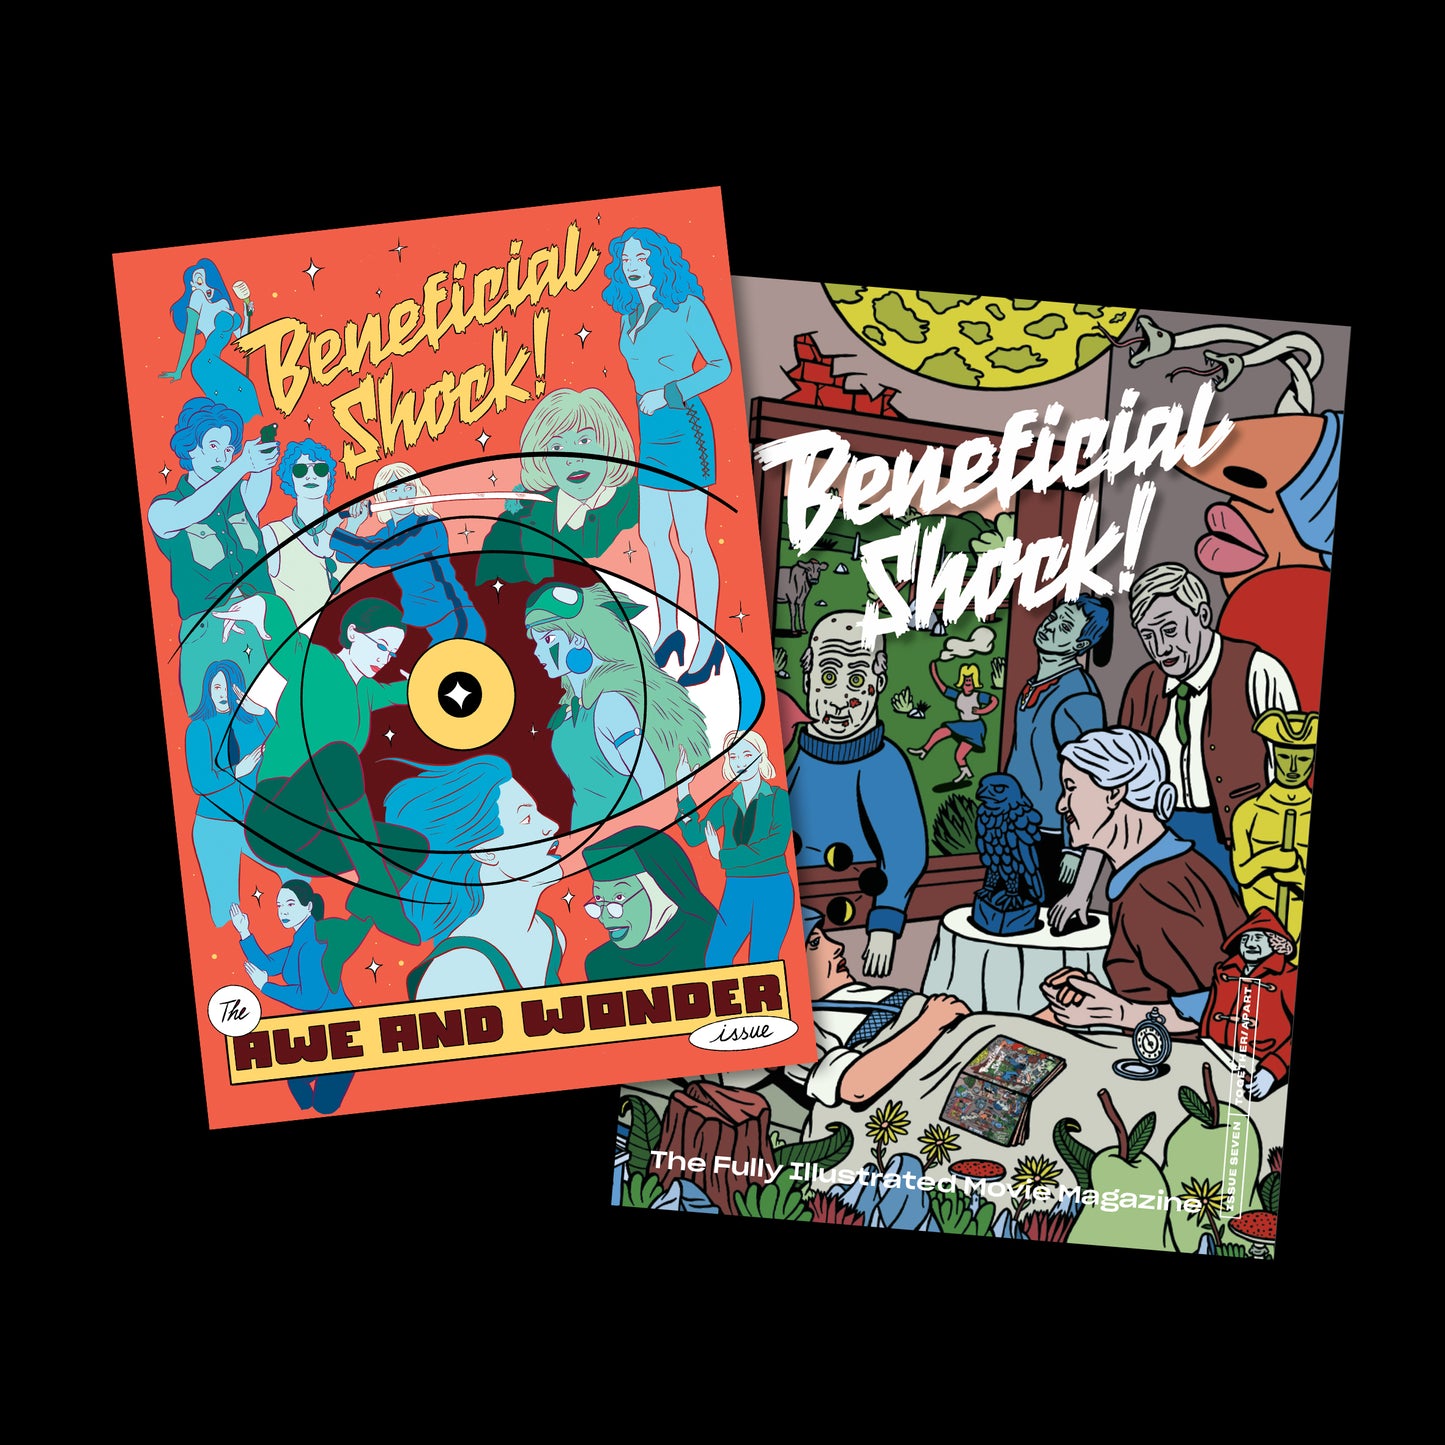 Beneficial Shock! issue 7 & 8 double-pack